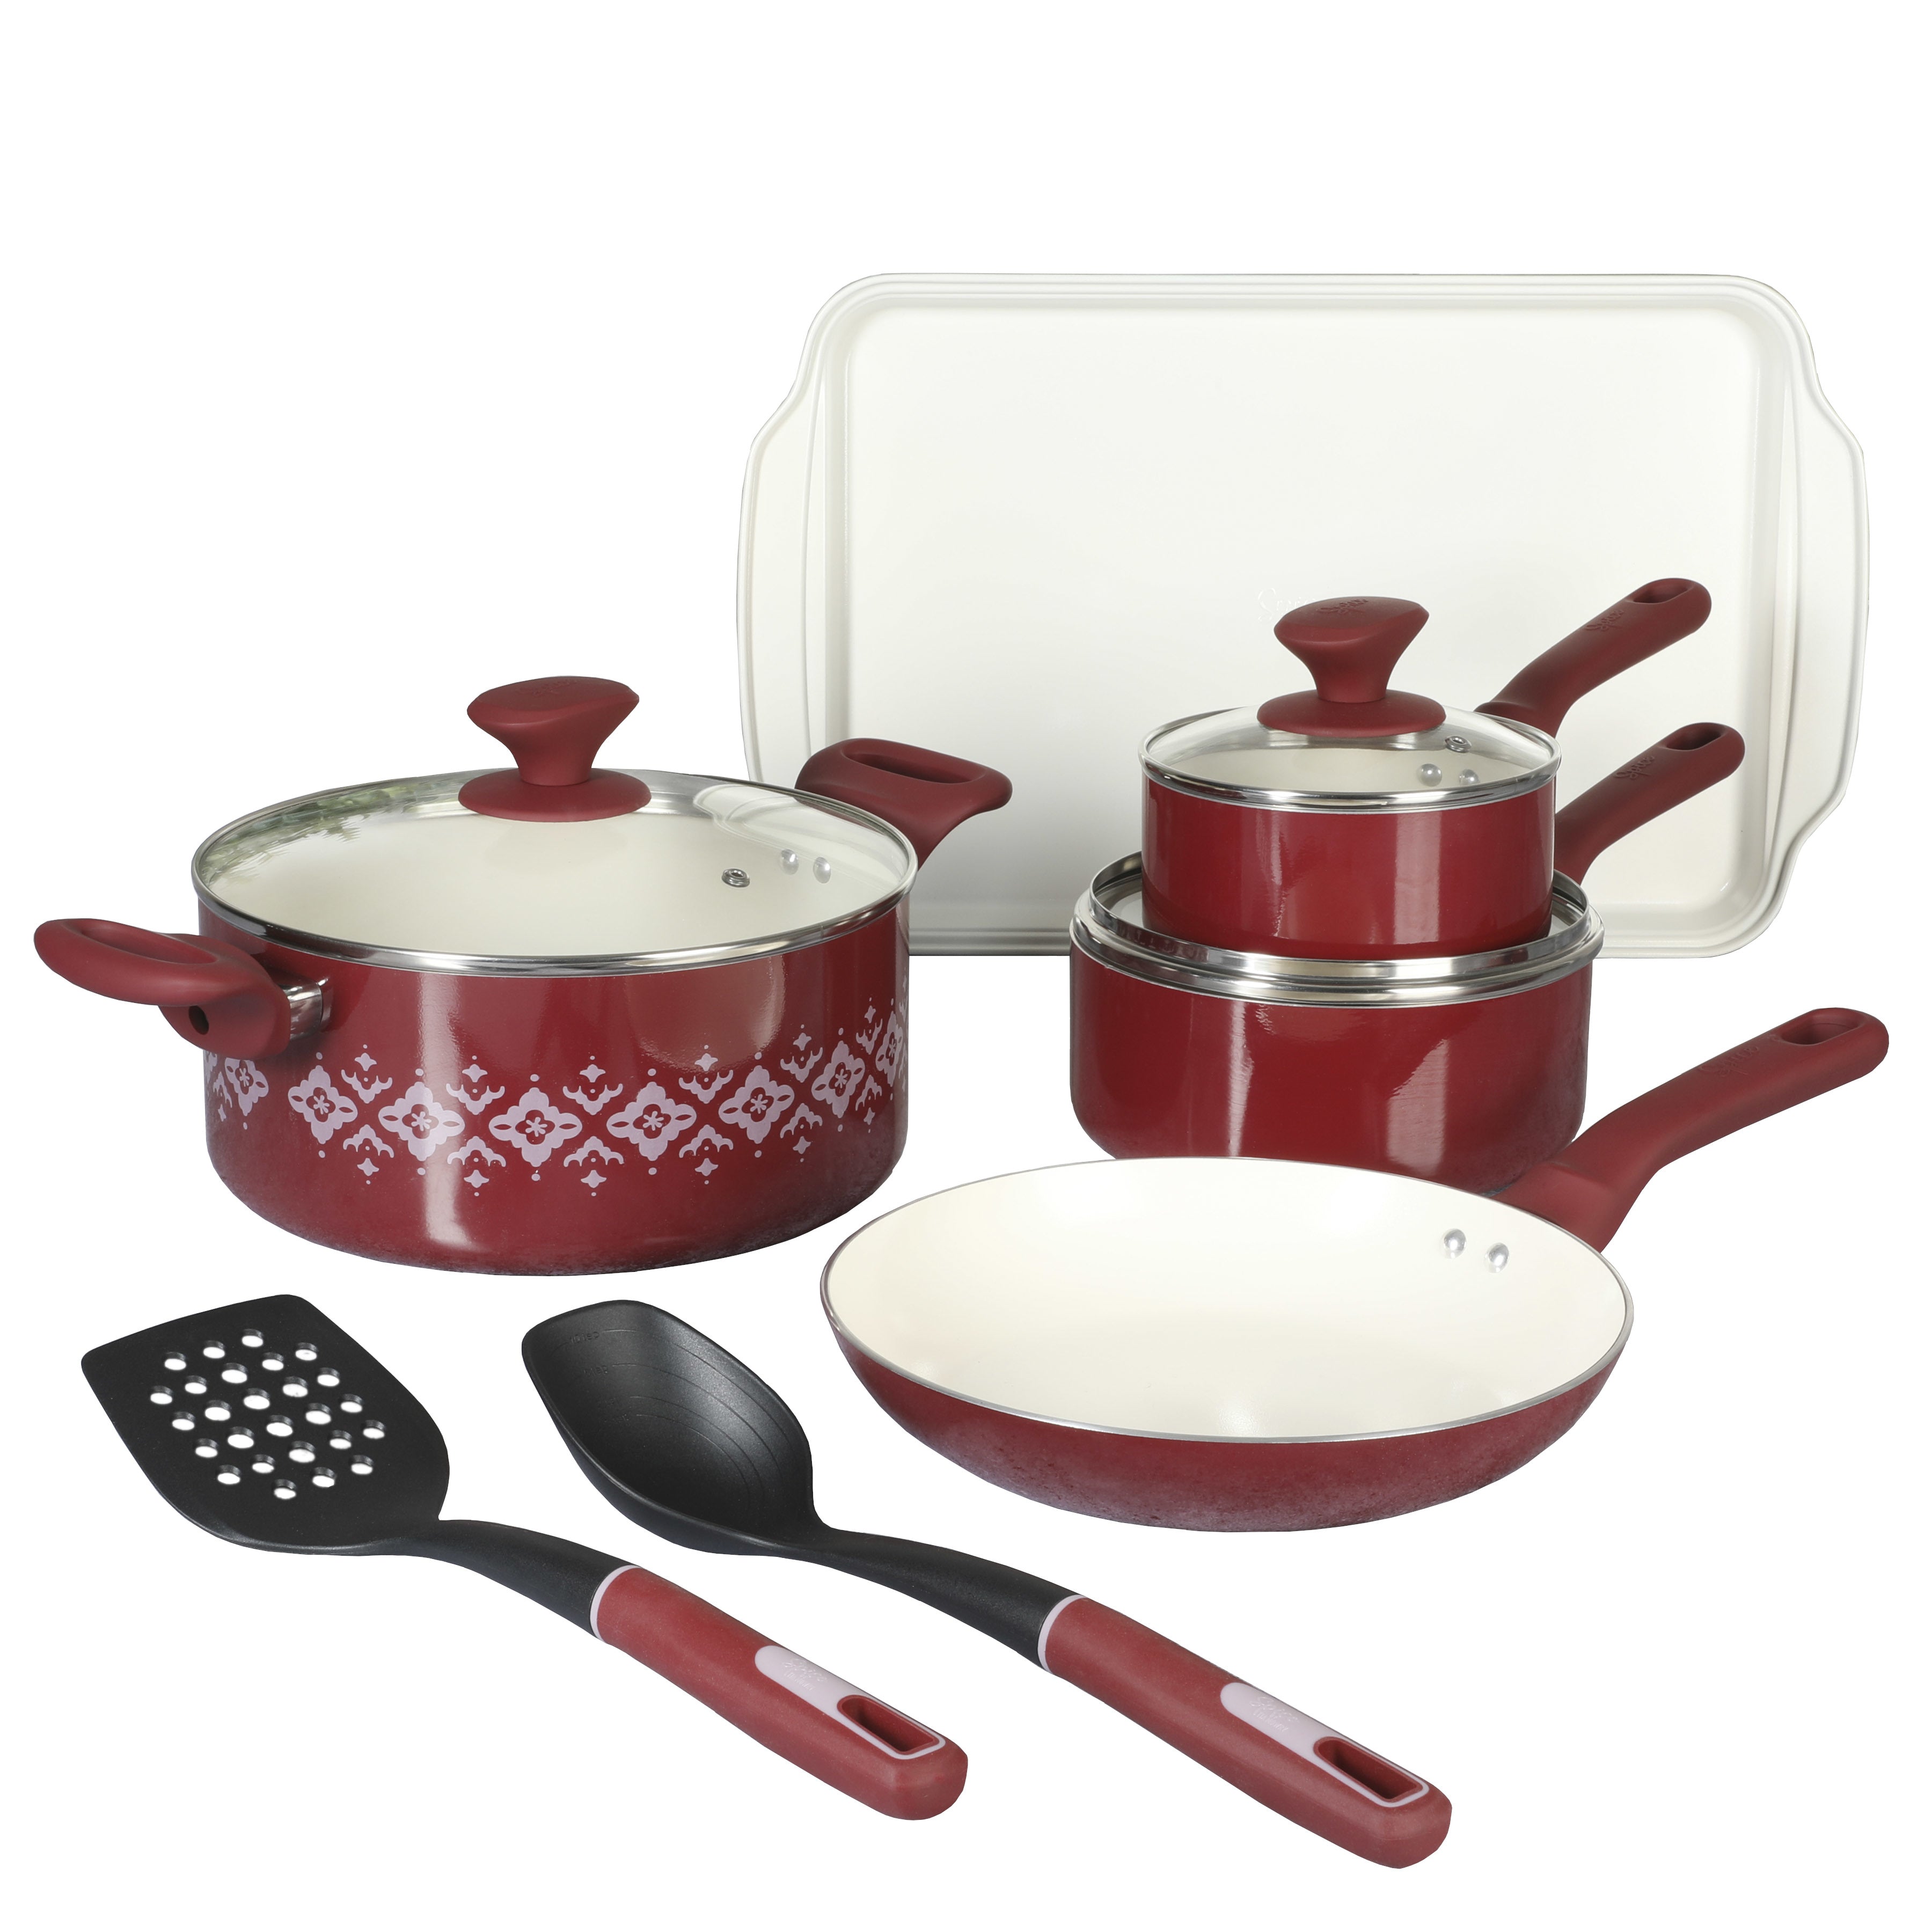 T-fal Easy Care Nonstick Cookware Set, 20 pc - Baker's